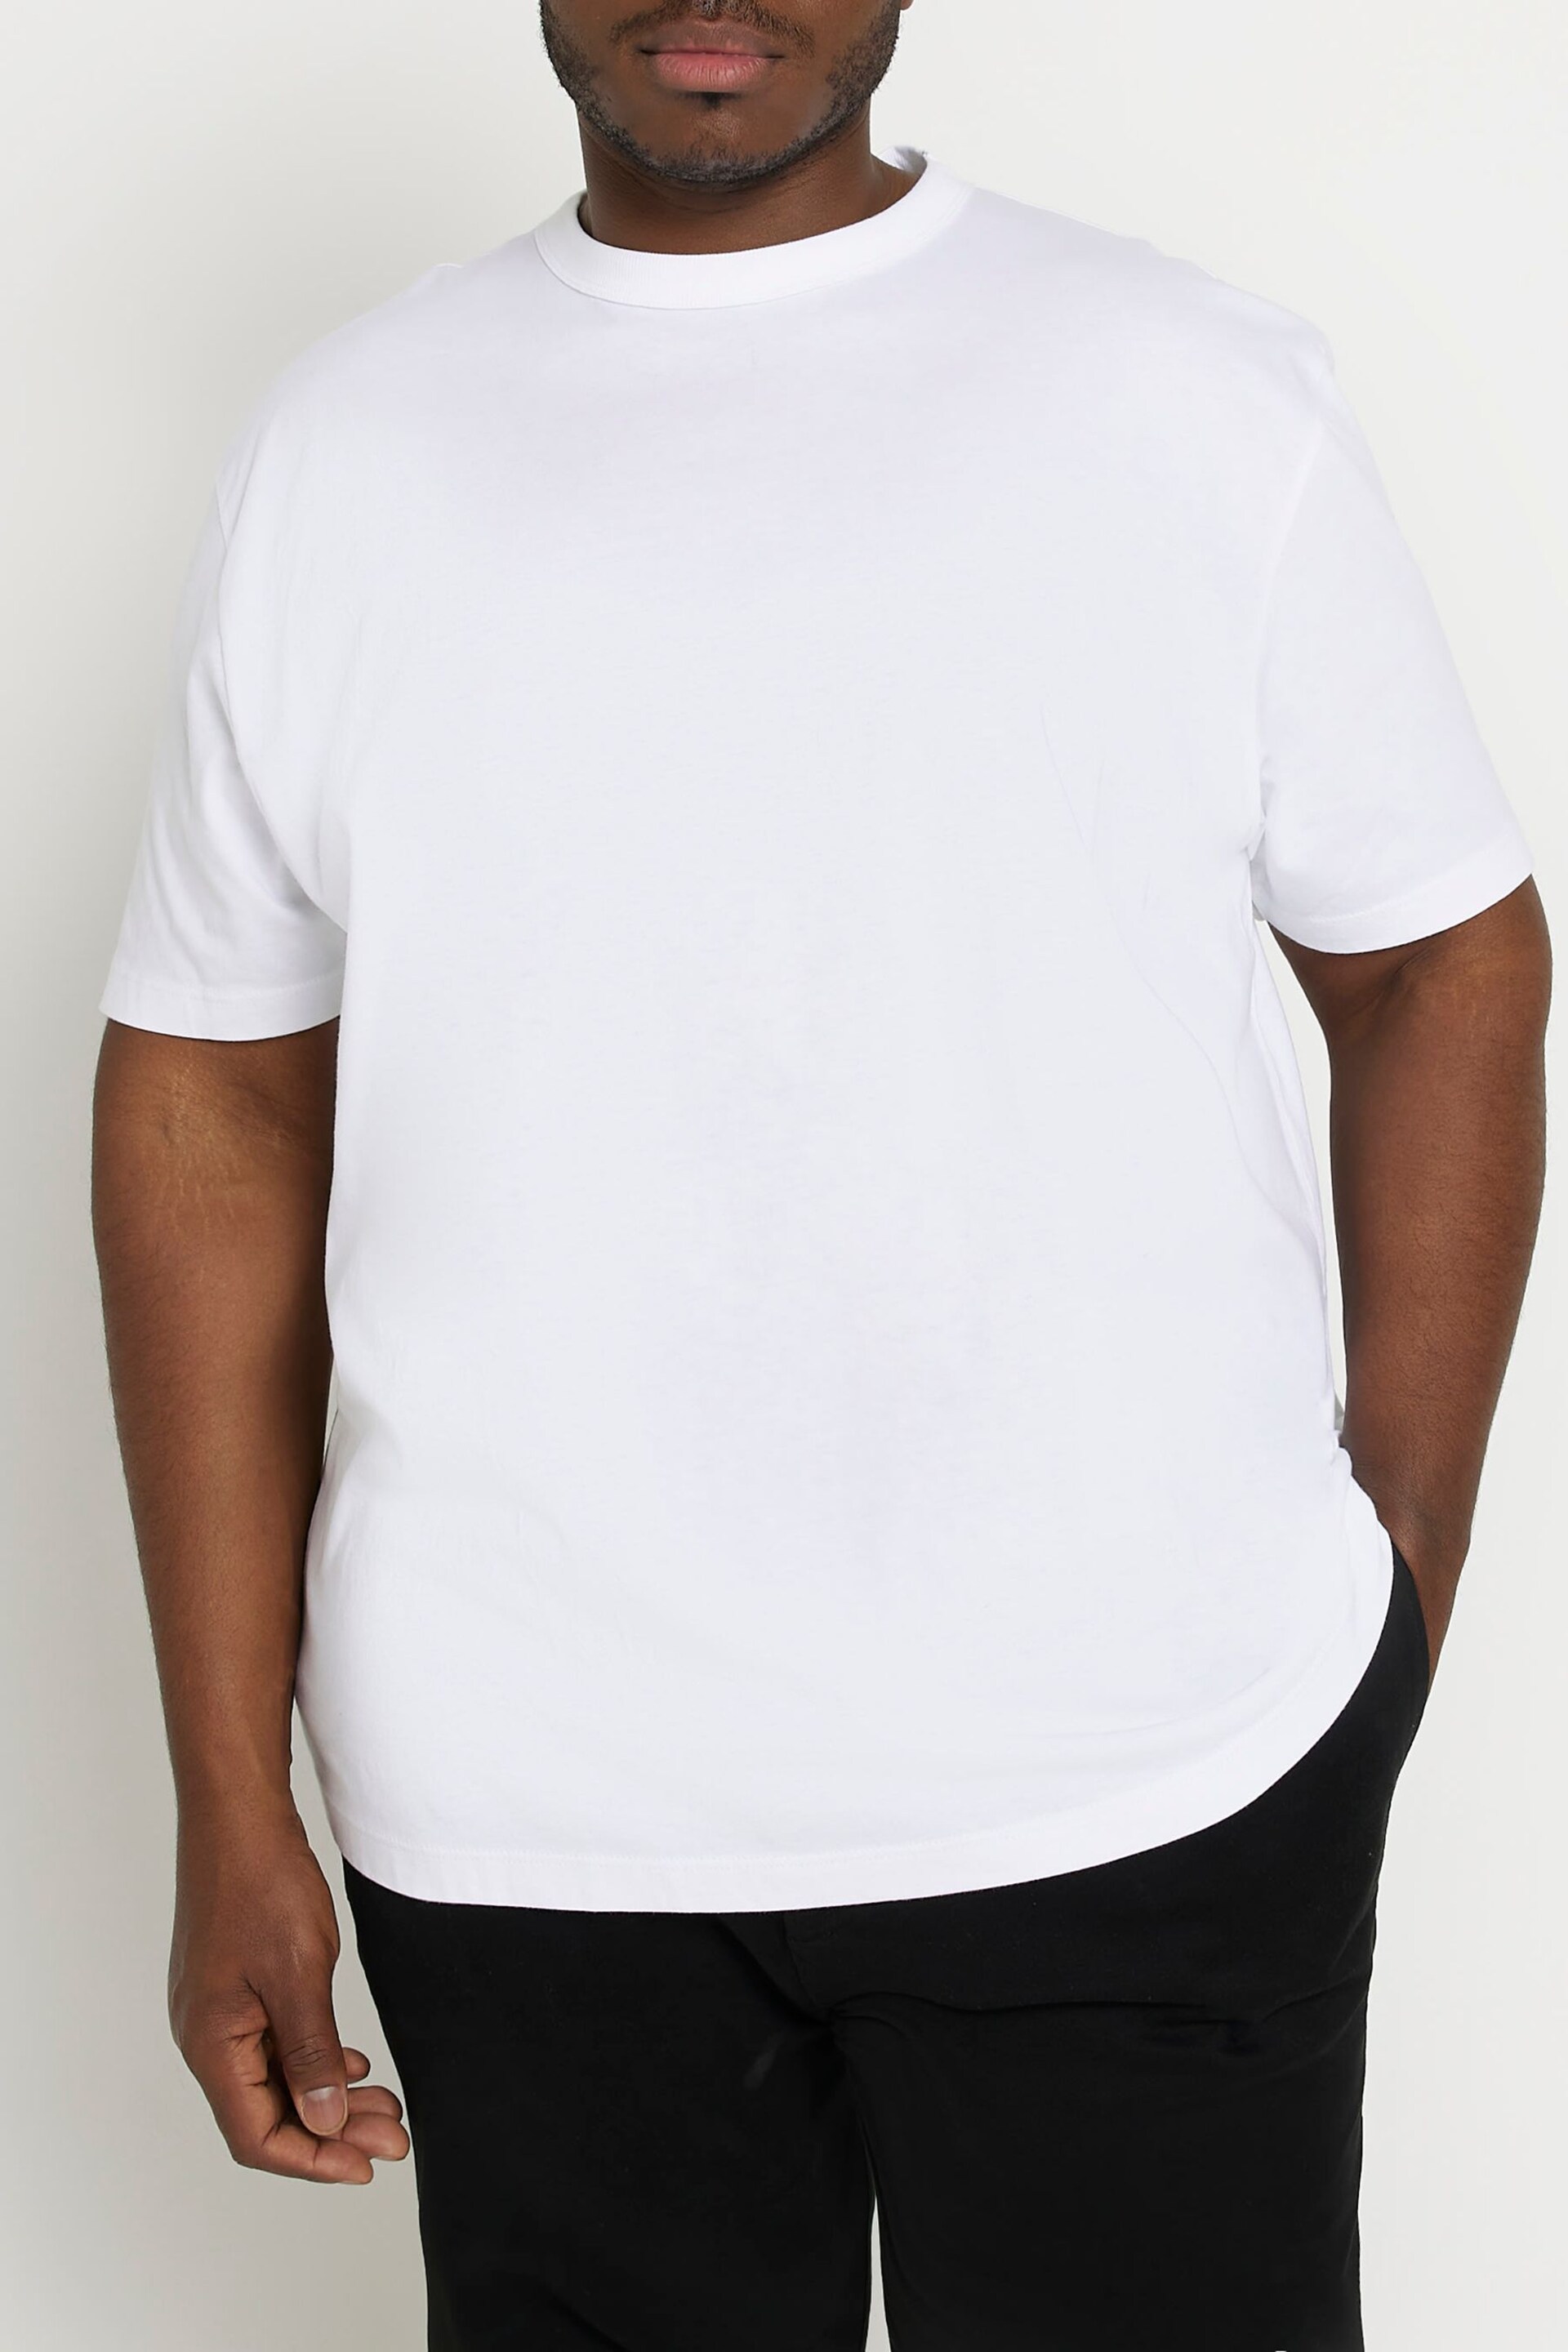 River Island White Big & Tall Regular Fit T-Shirt - Image 1 of 4